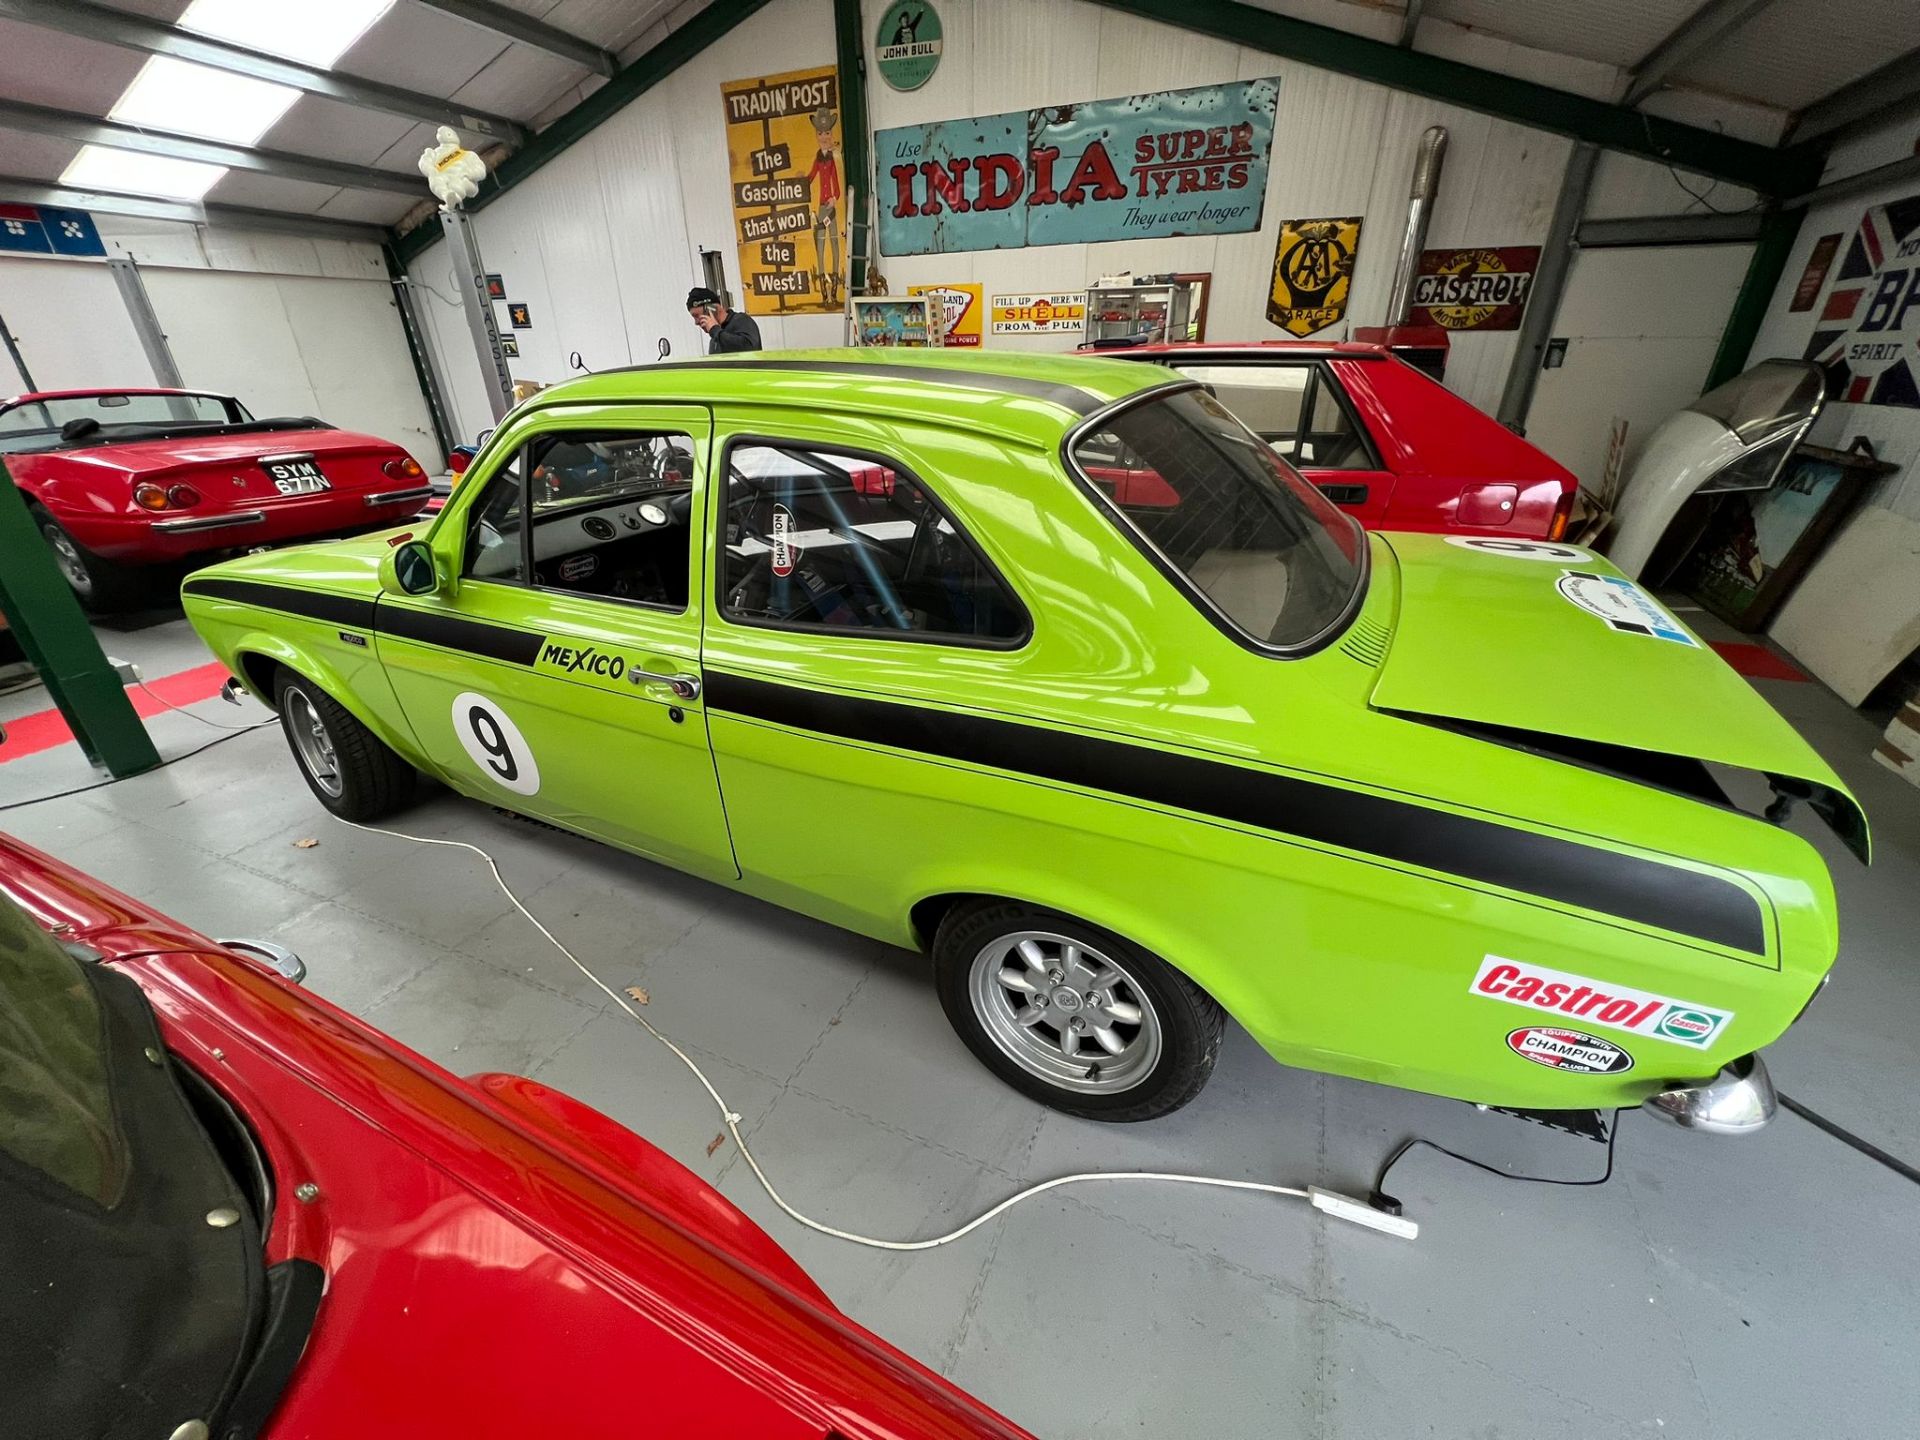 Ford Escort Mk1 X-Sport Mexico Competition Car 1973 - Image 3 of 16